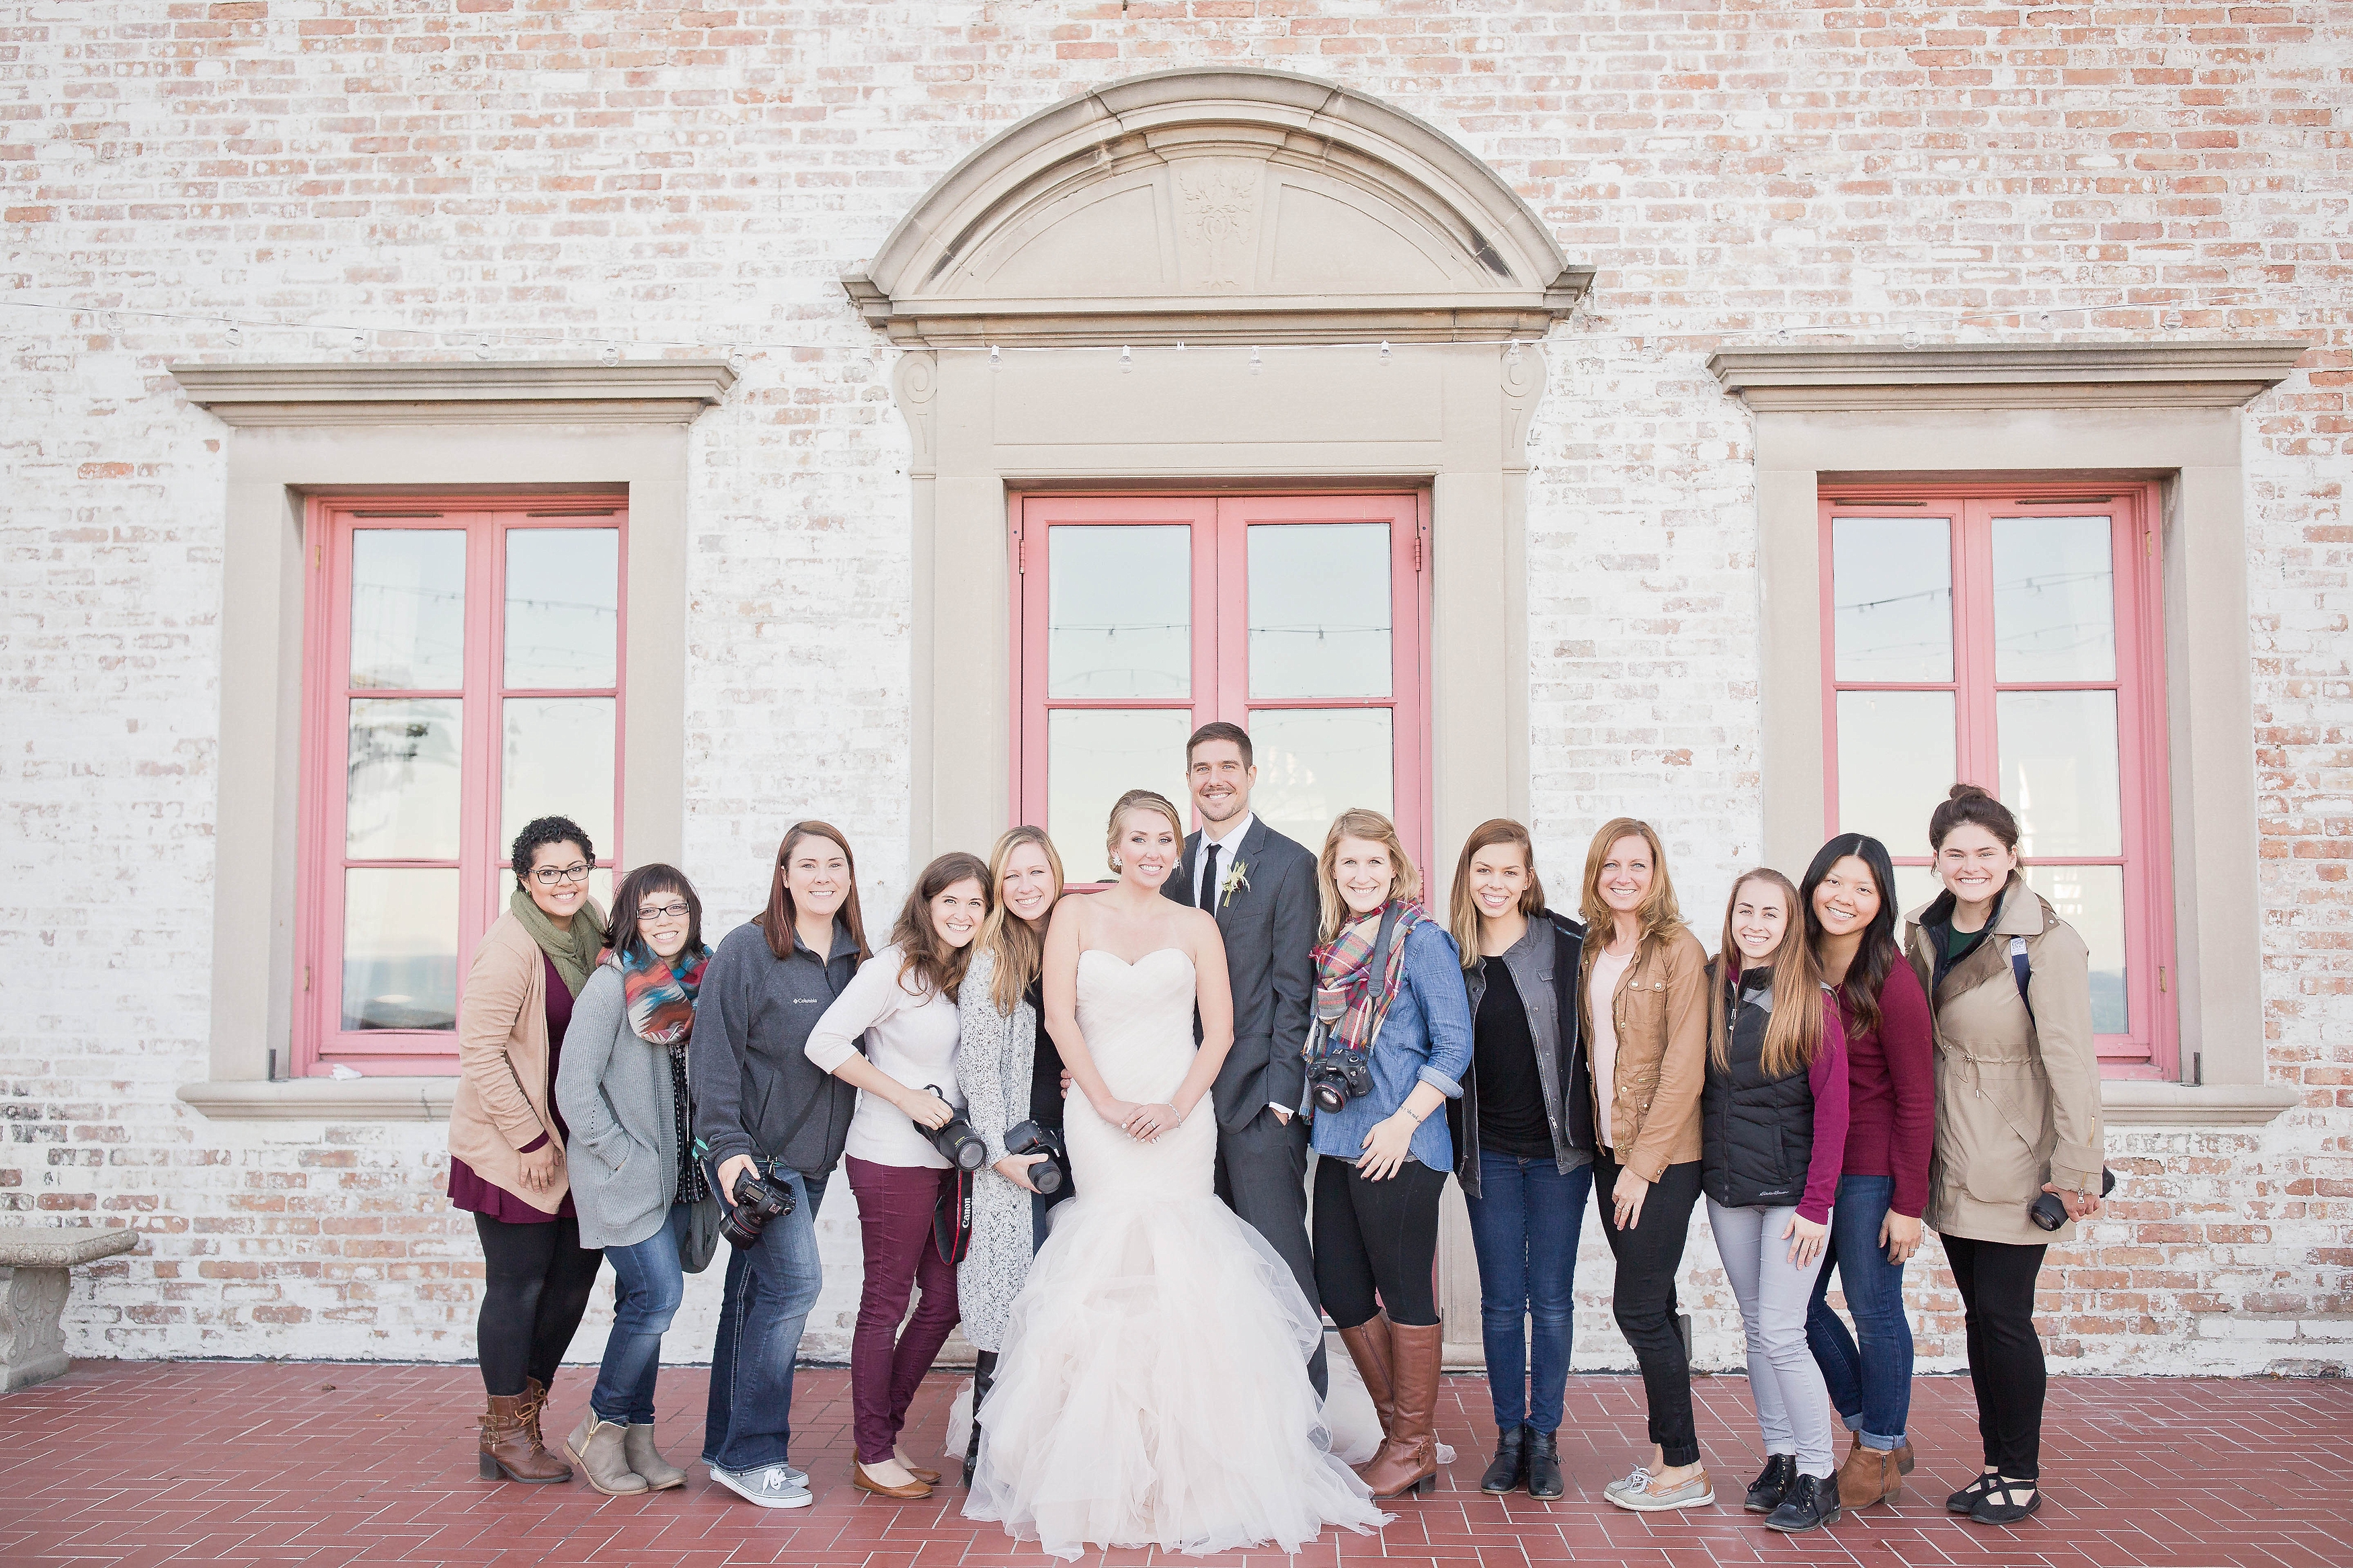 The Gracefully Wed Wedding Photography Workshop